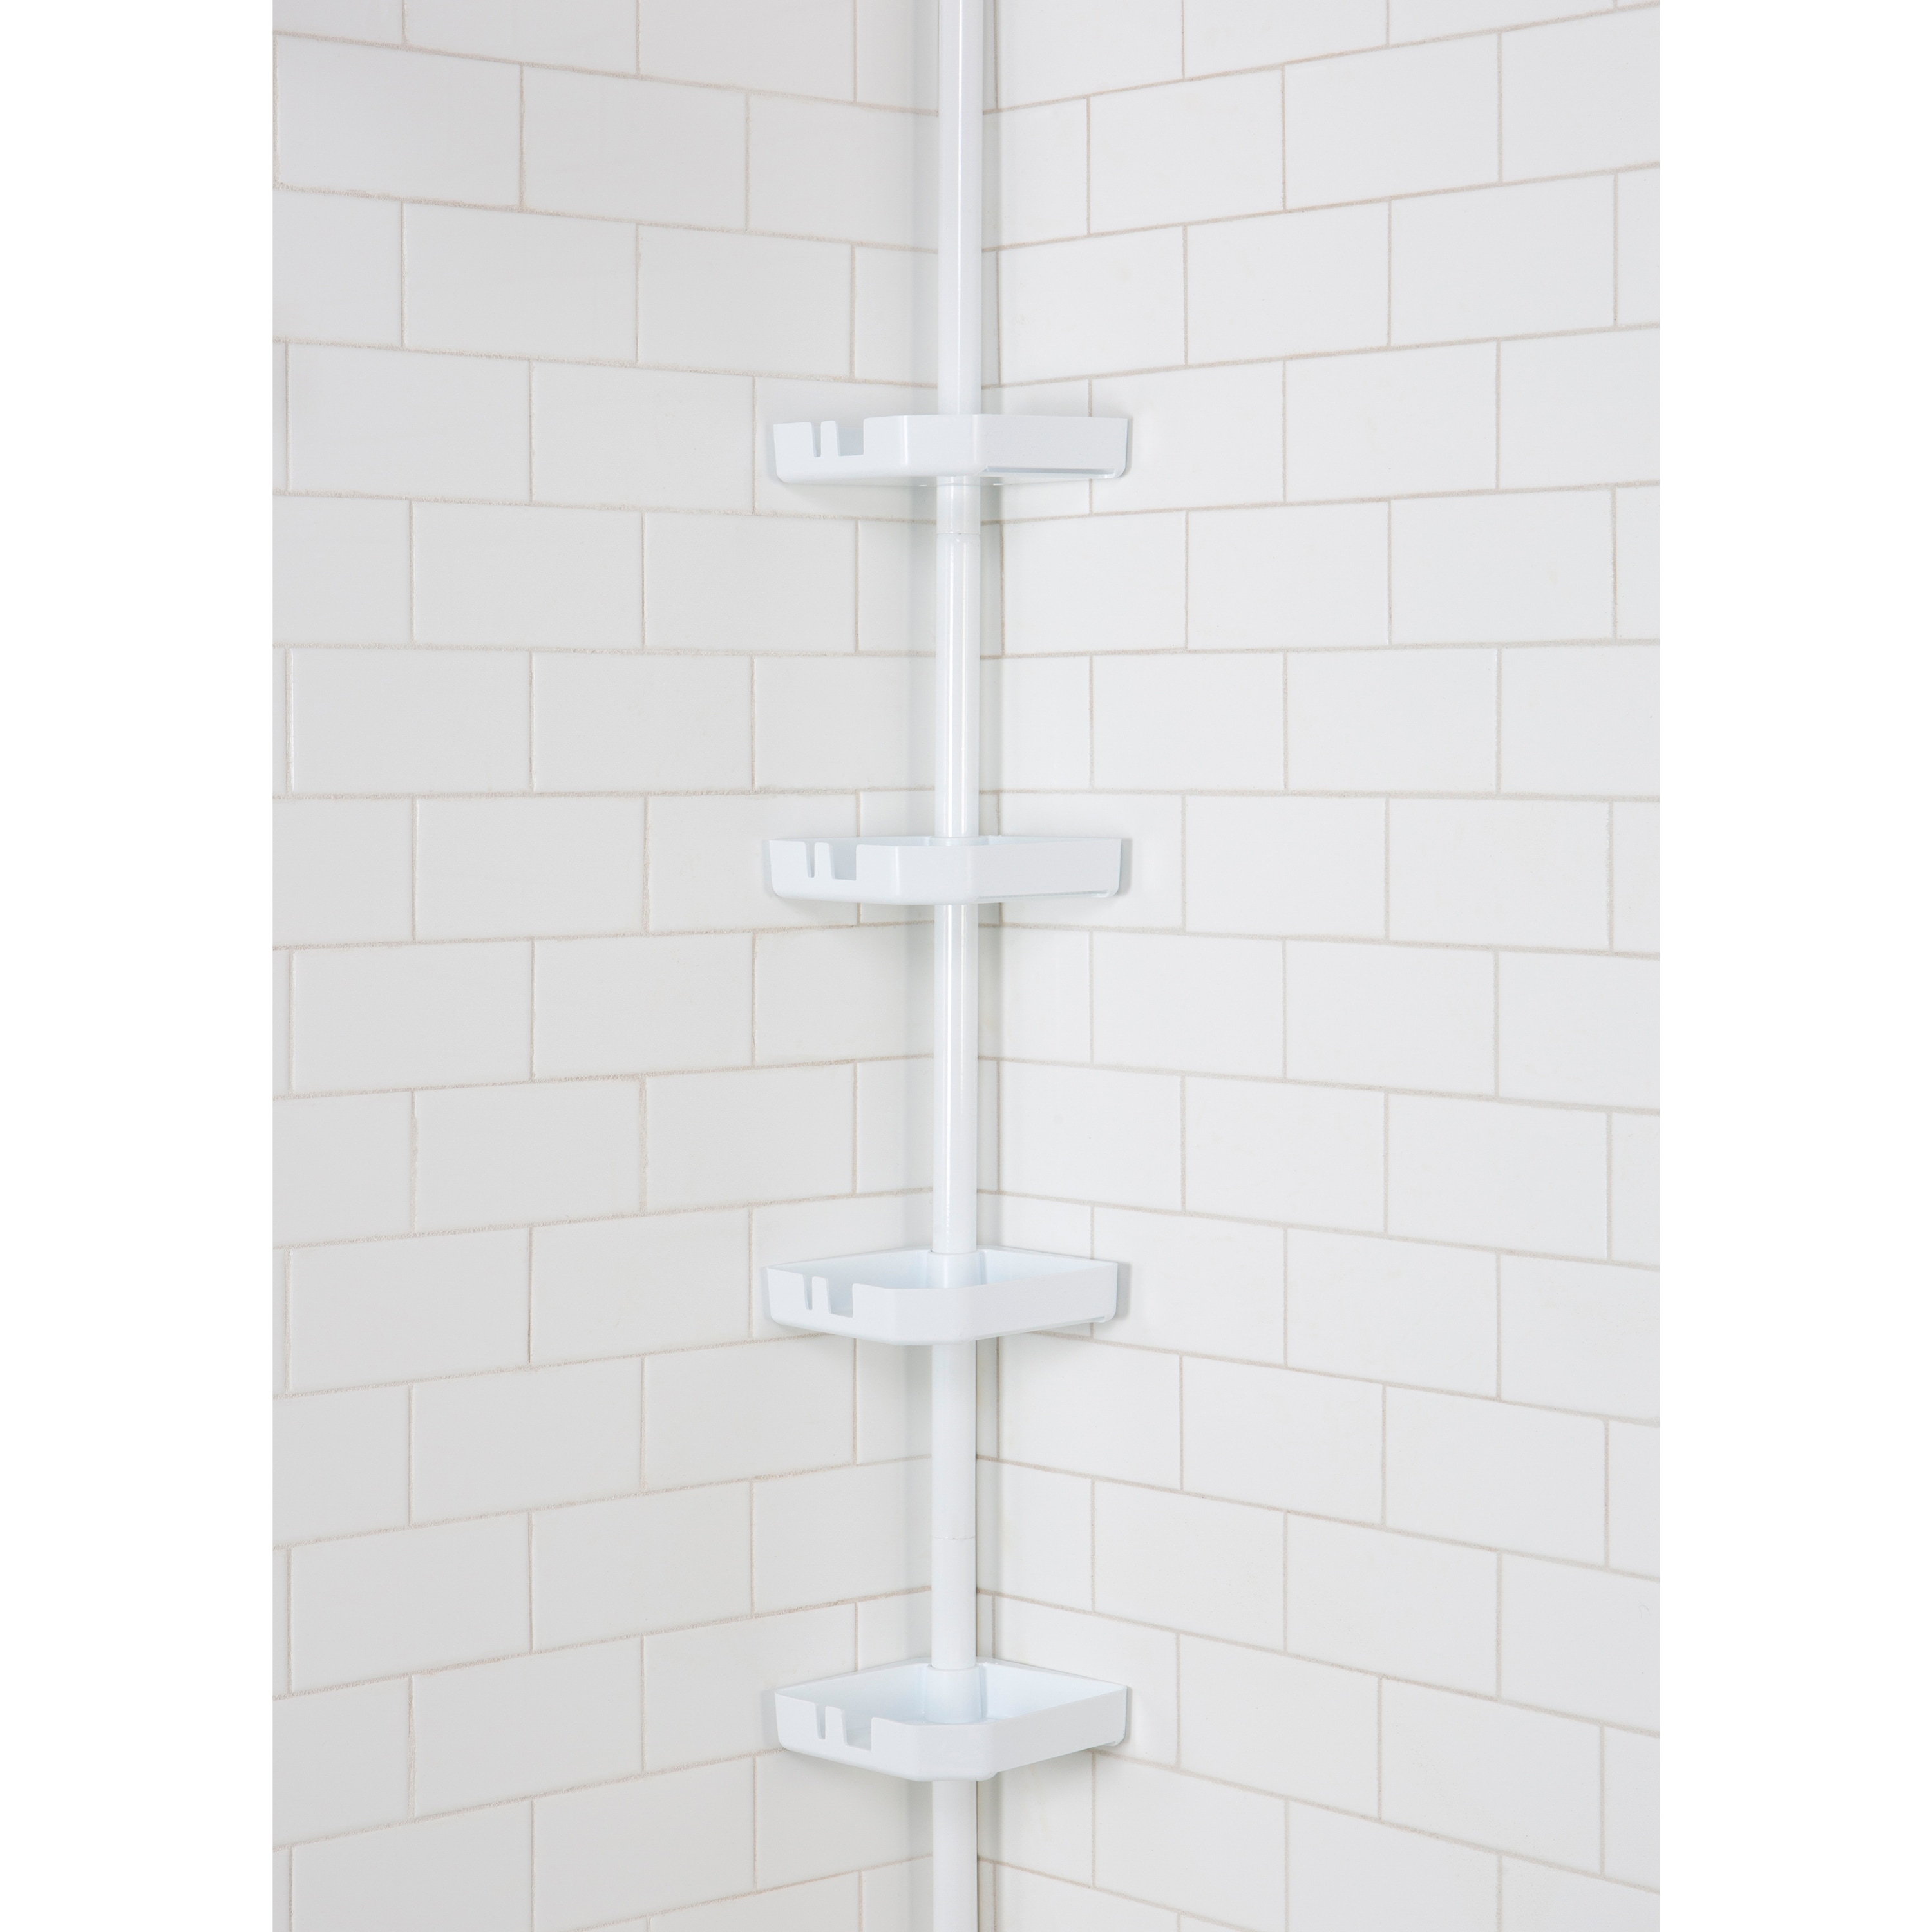 https://ak1.ostkcdn.com/images/products/is/images/direct/dbe47492da63be18c3952a75c57fe7d258c978ca/Bath-Bliss-4-Tier-Tension-Corner-Shower-Organizer-Caddy-in-Grey.jpg